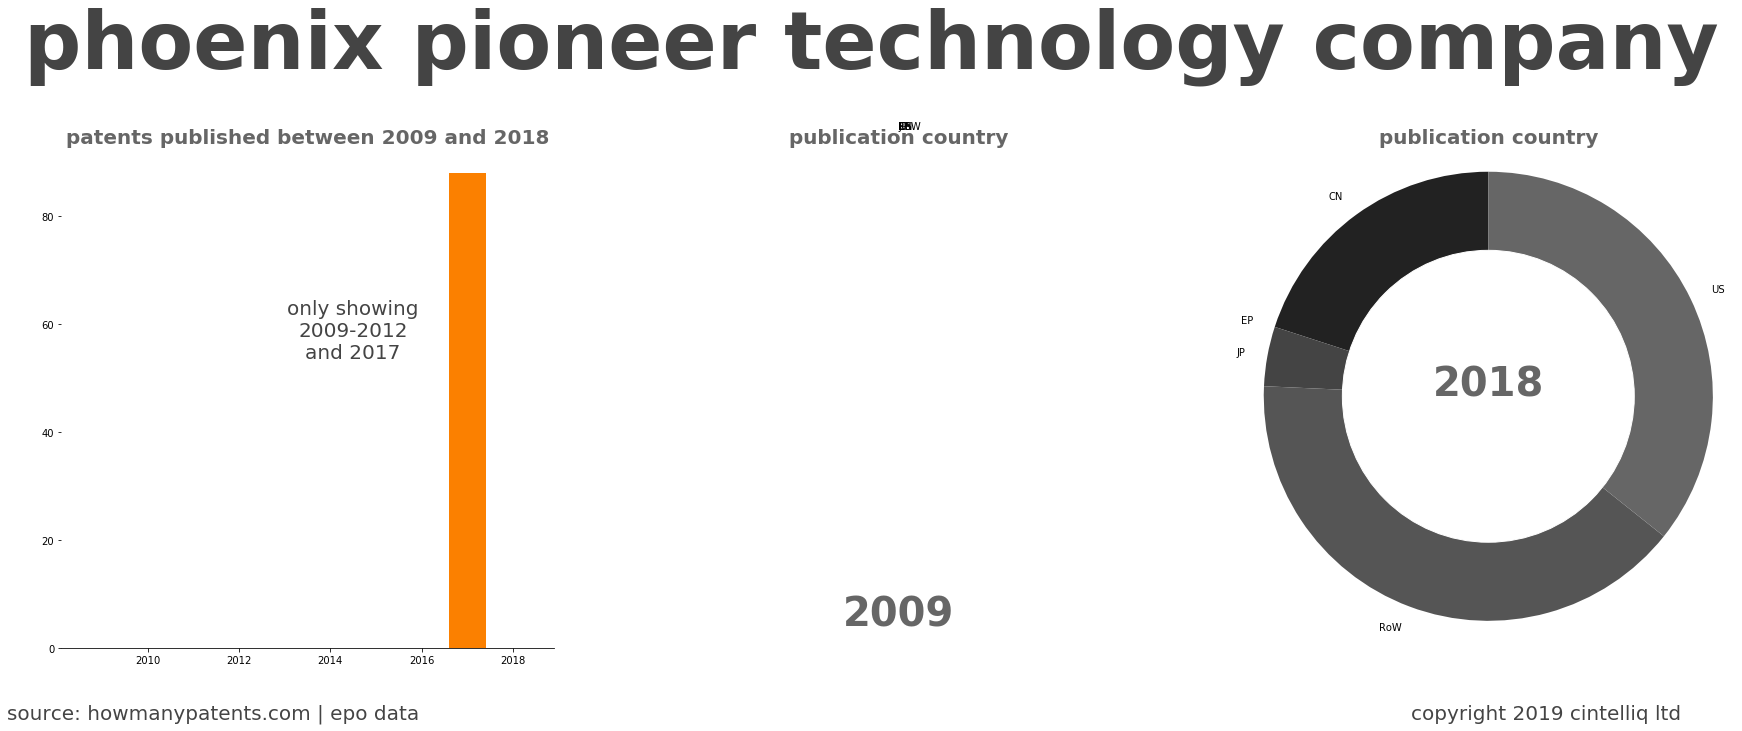 summary of patents for Phoenix Pioneer Technology Company